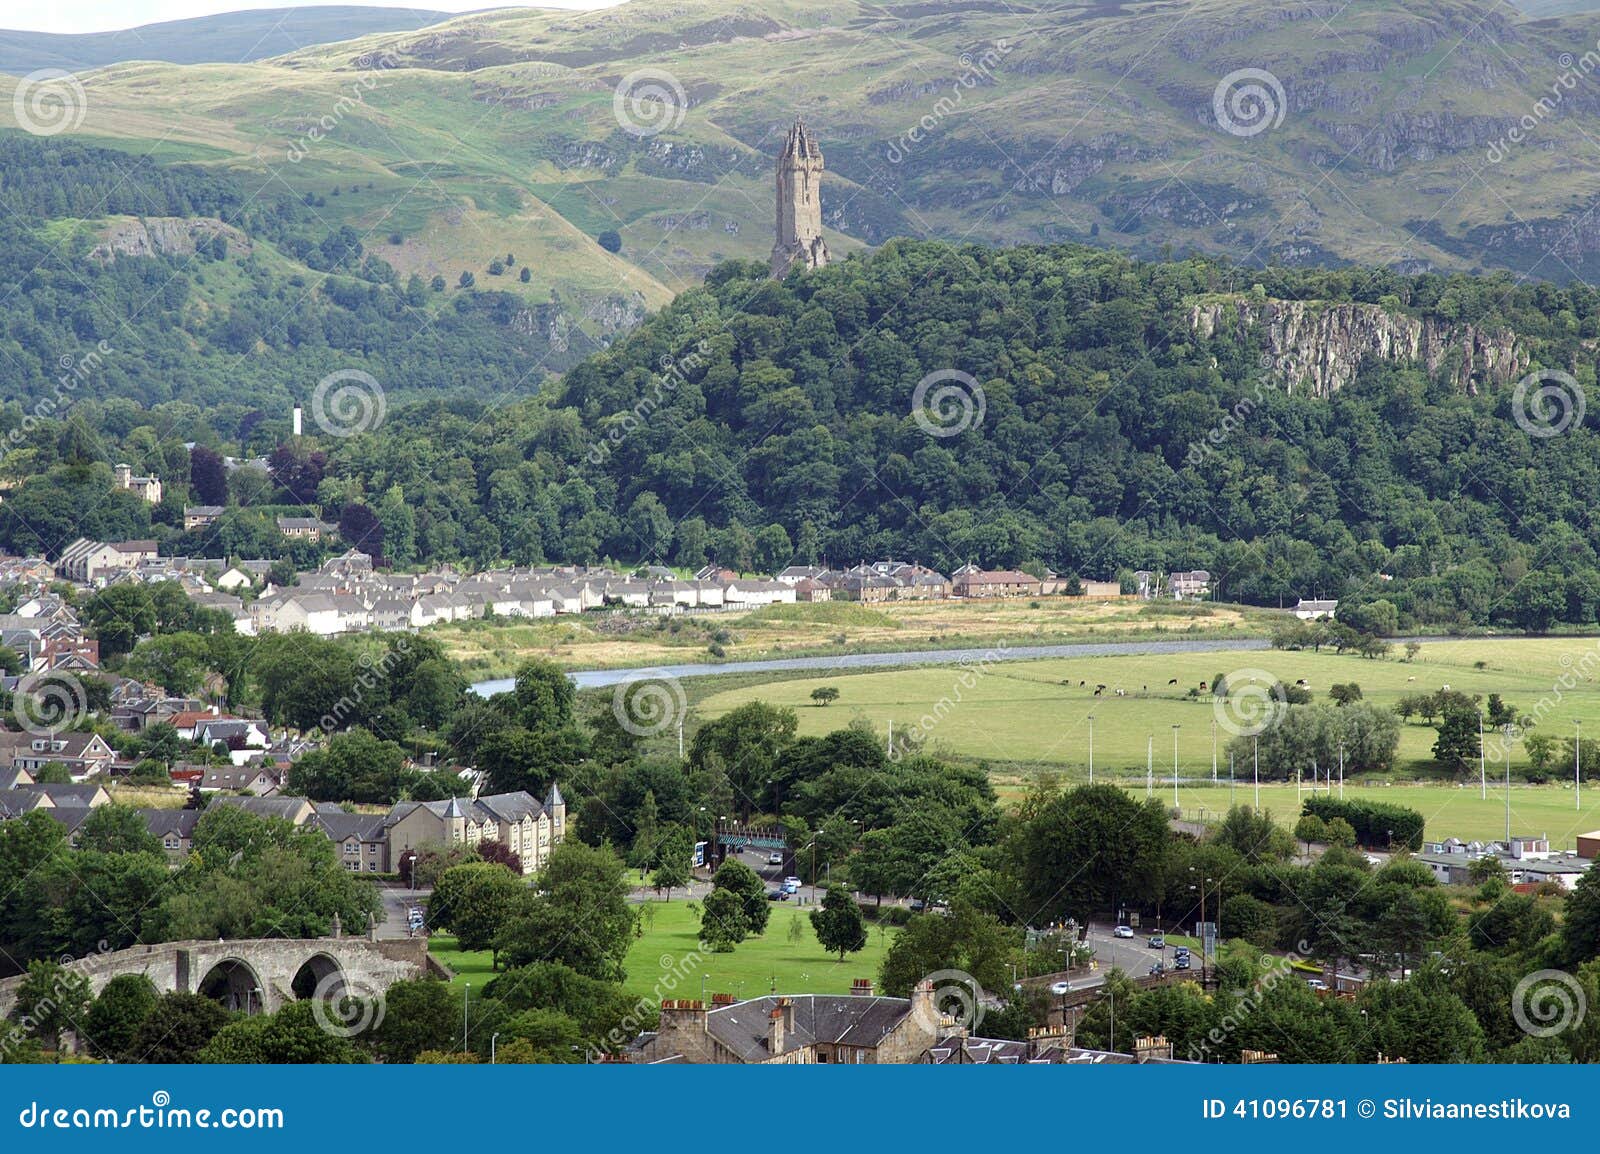 stirling, wallace monument